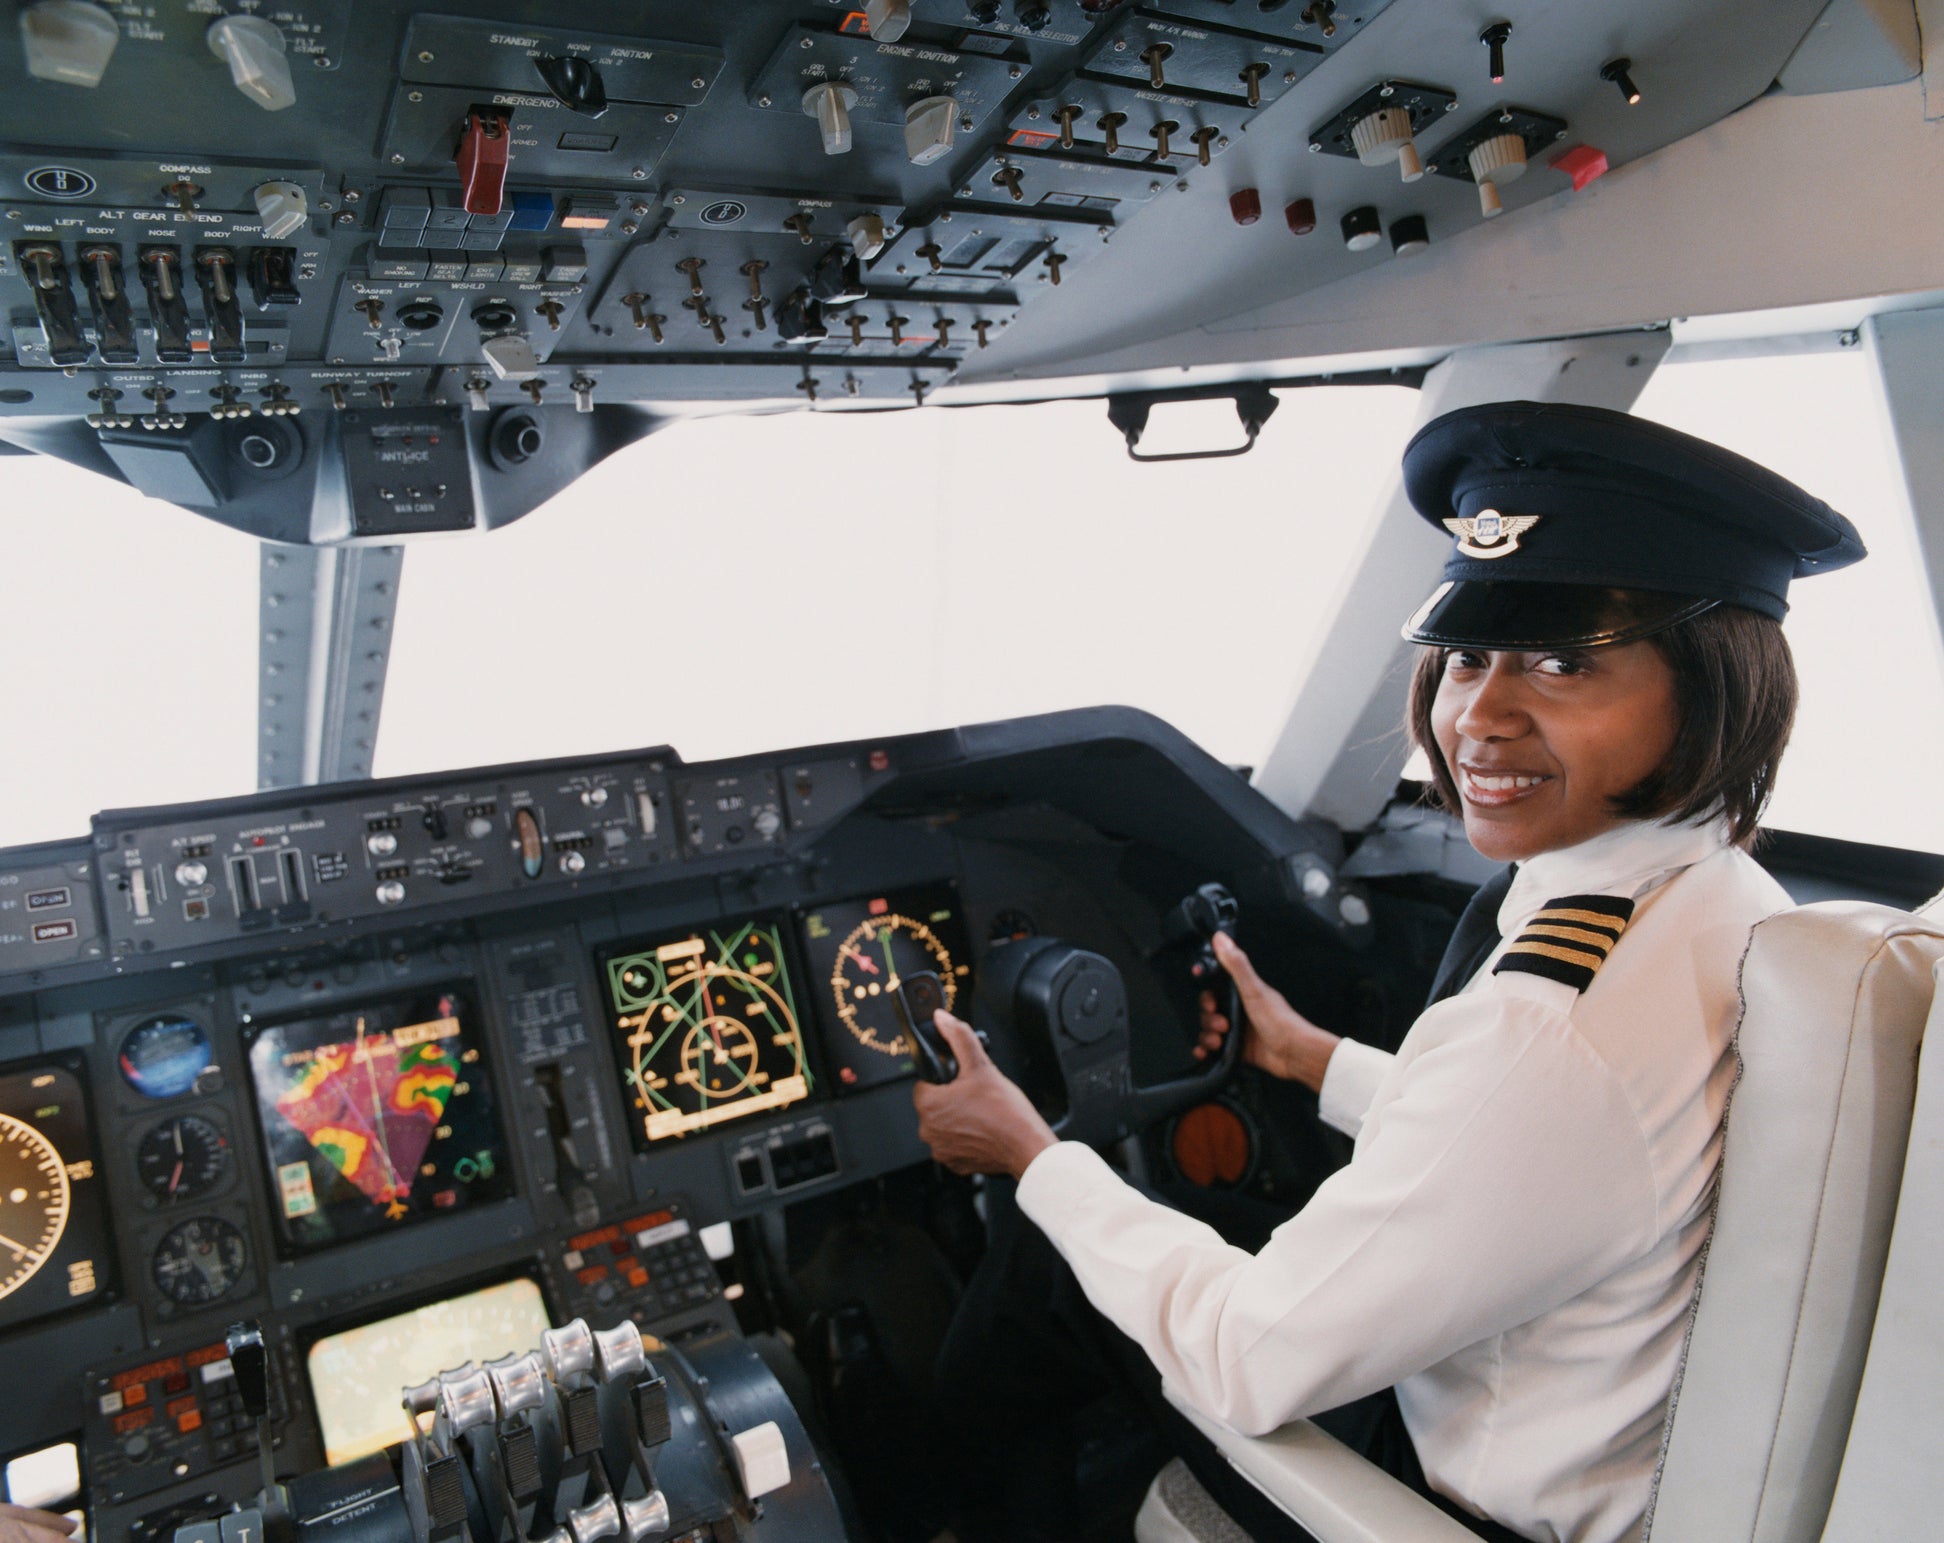 Boeing Investing Almost A Million Dollars In Scholarships To Increase Diversity Of Commercial Pilots